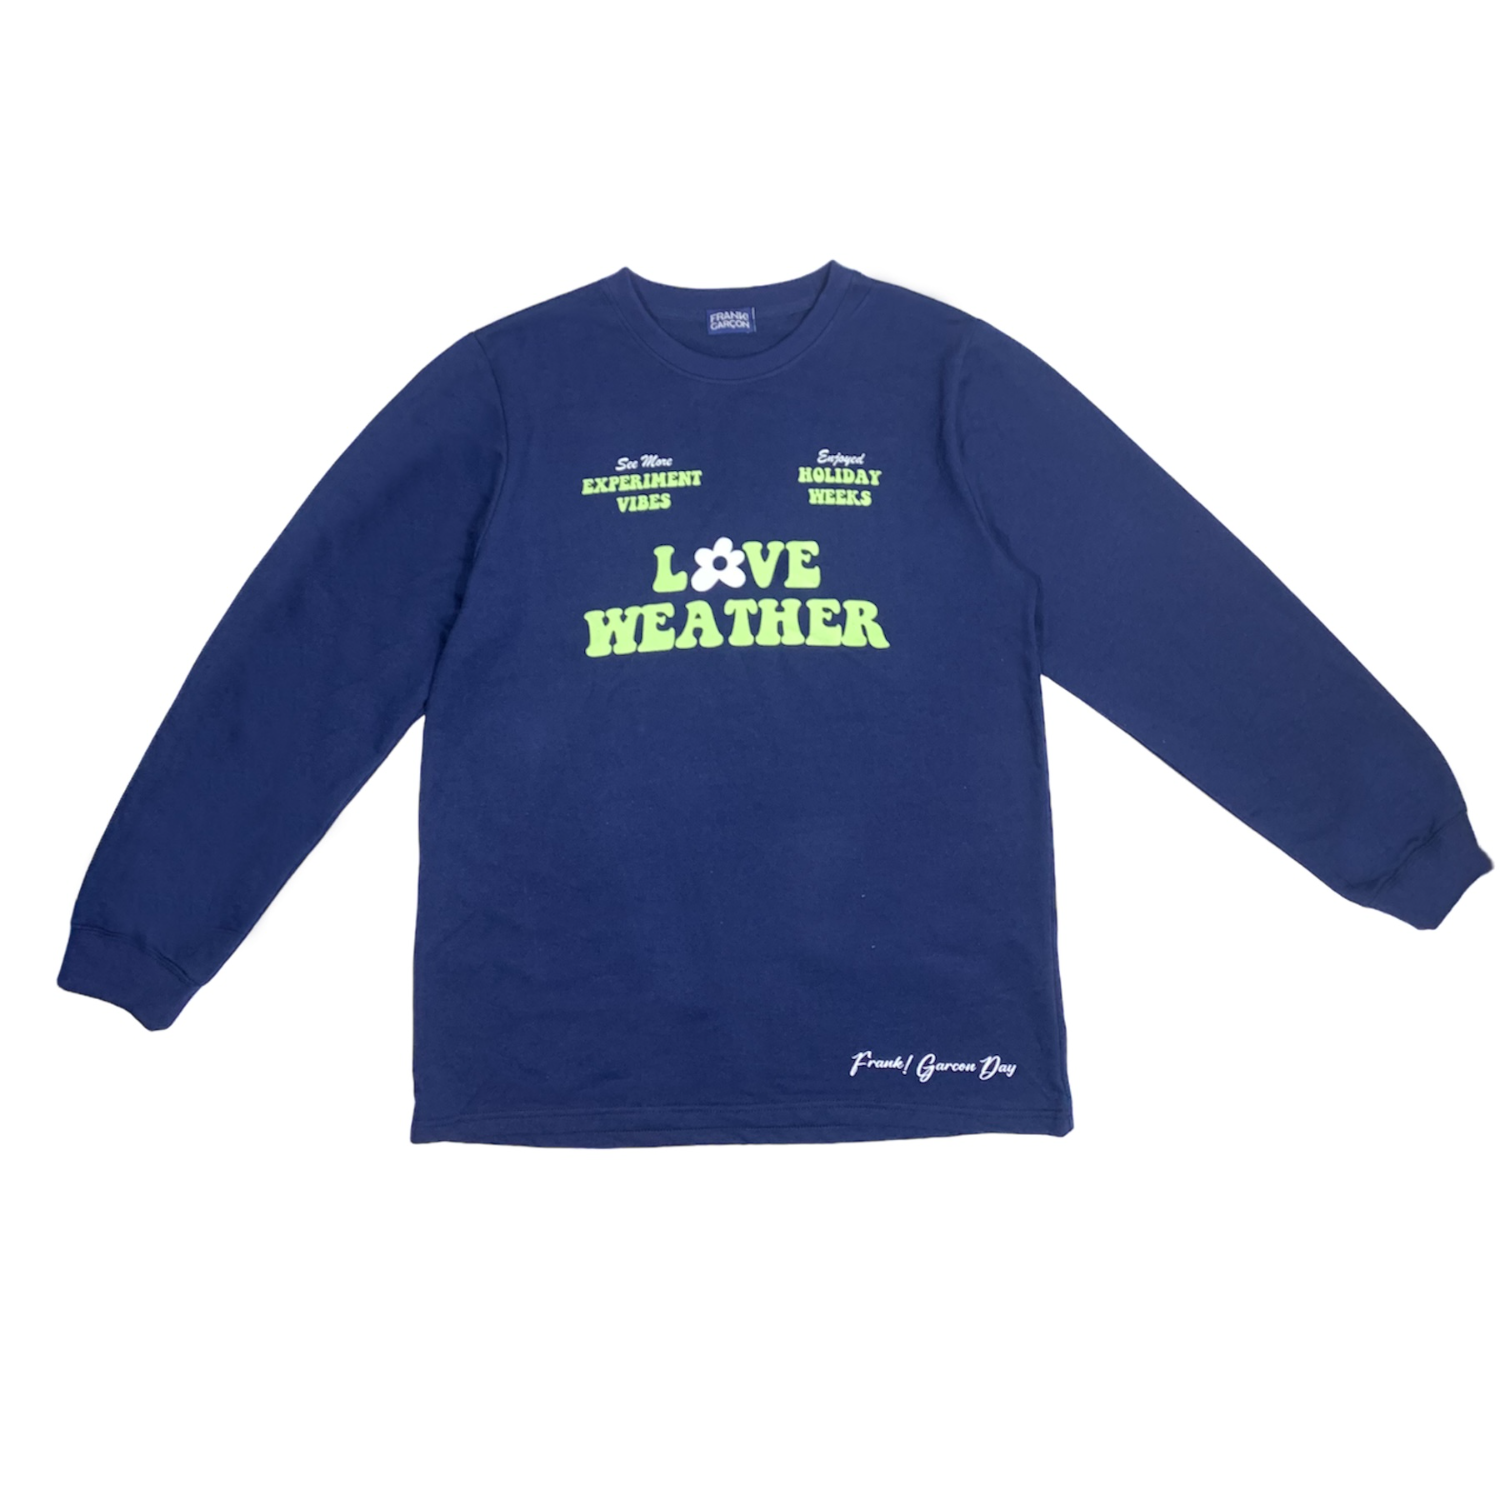 Love Weather Sweater (Navy)